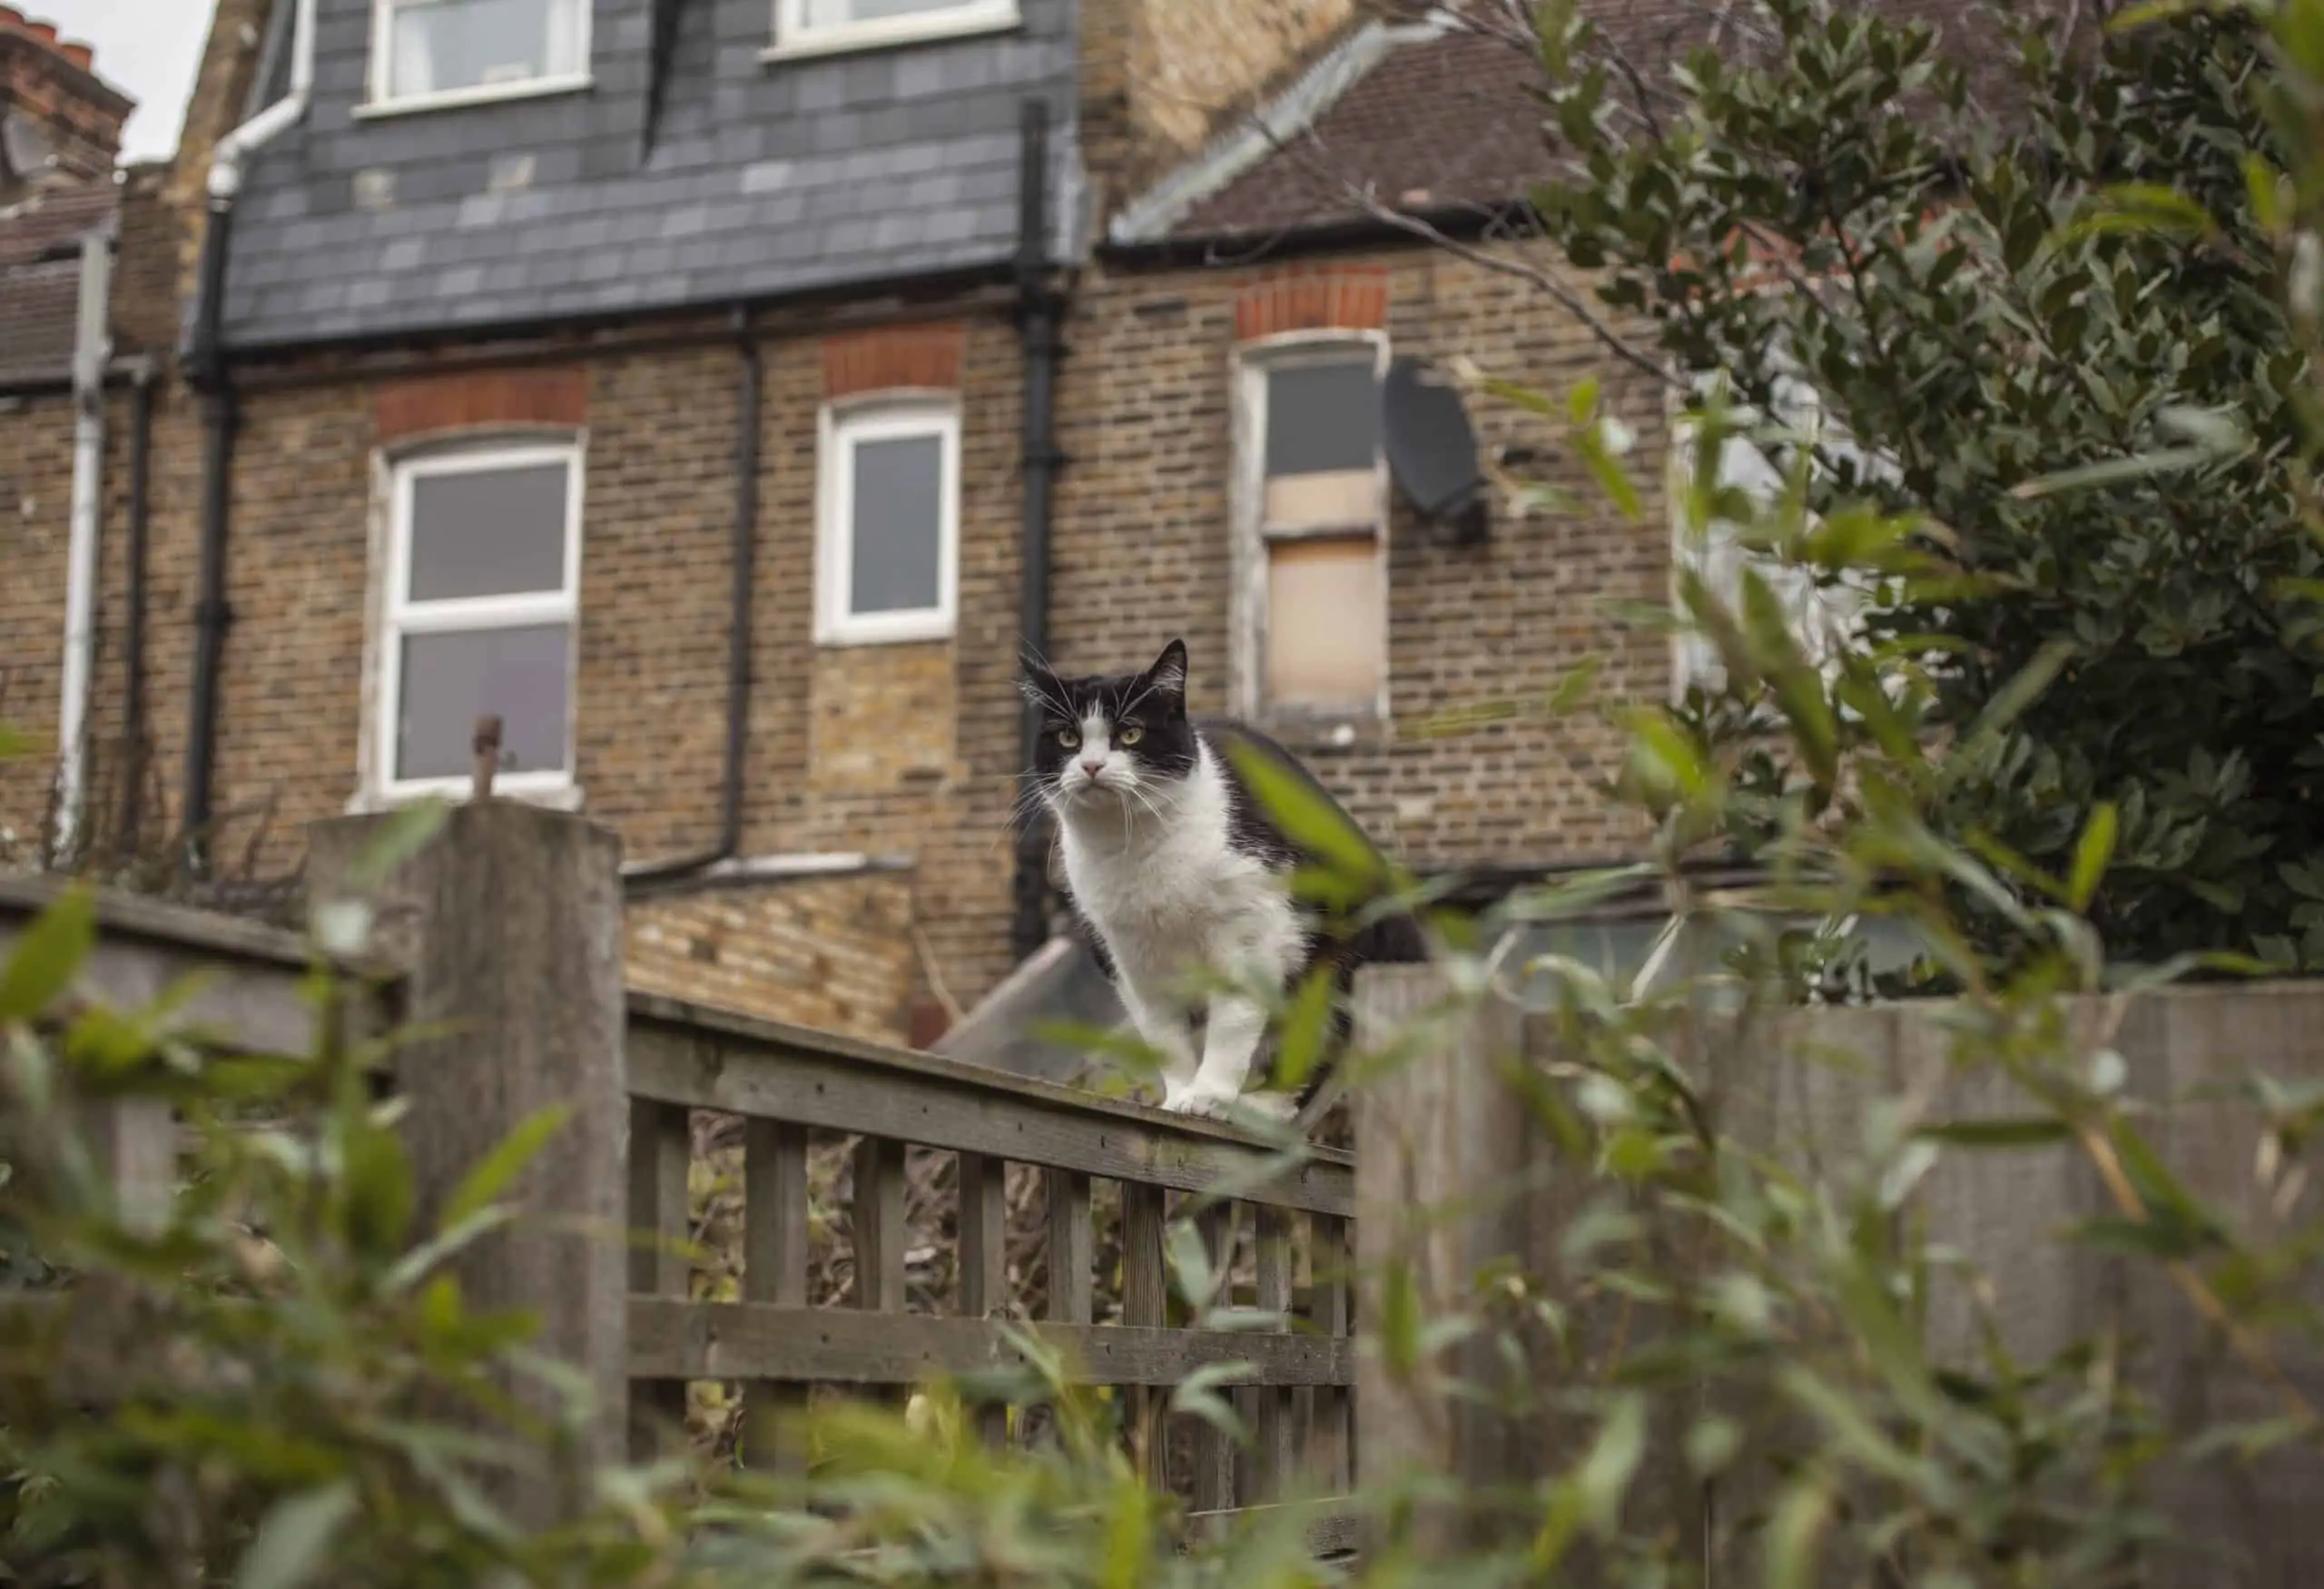 Protect your cat from venturing into a garden that has been sprayed with weed killer and not dried yet